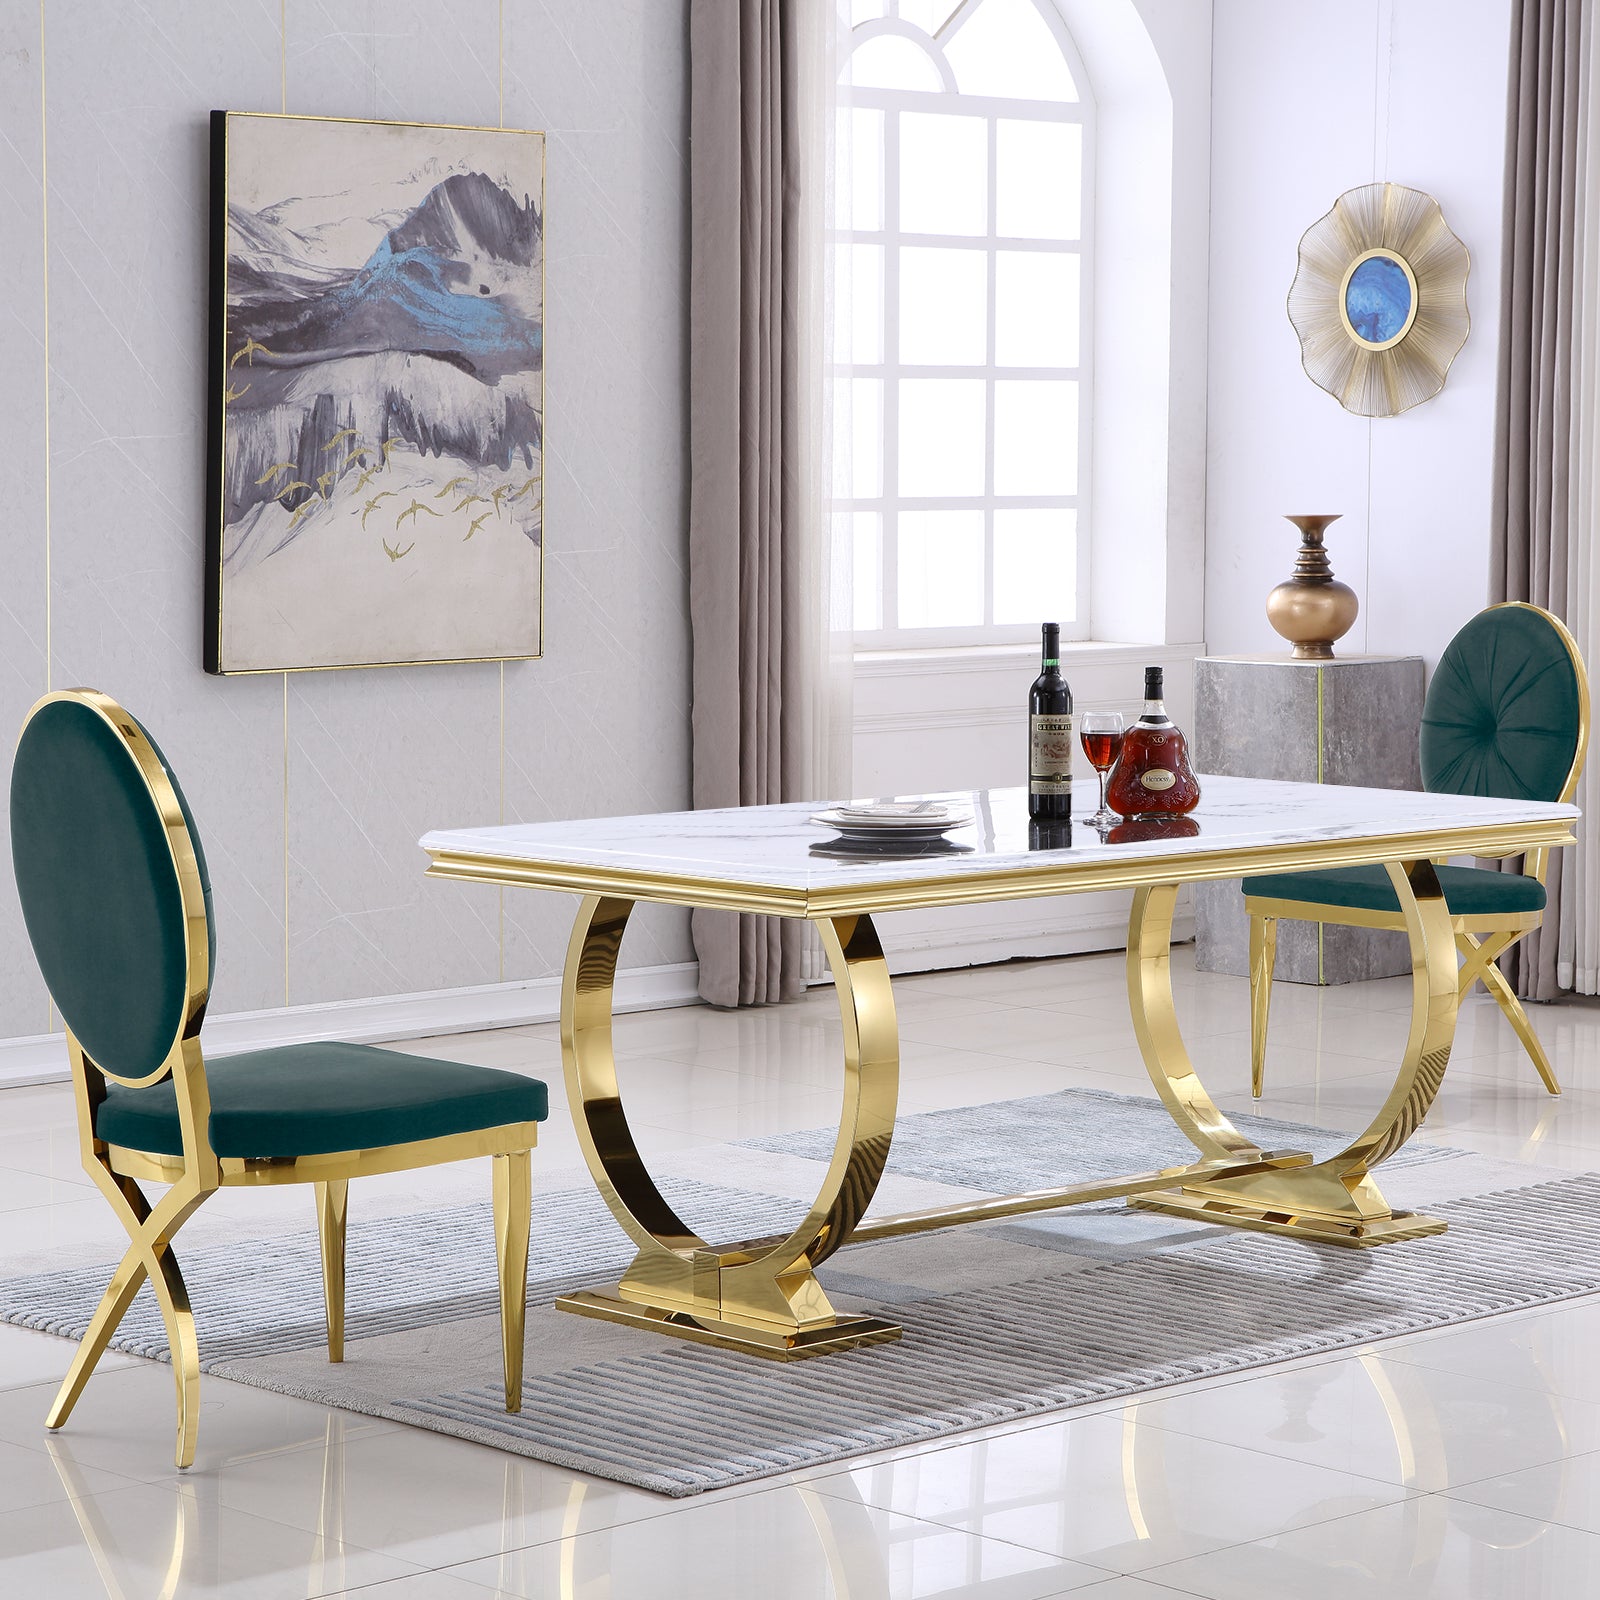 632-Set | AUZ White and Green Dining room Sets for 6